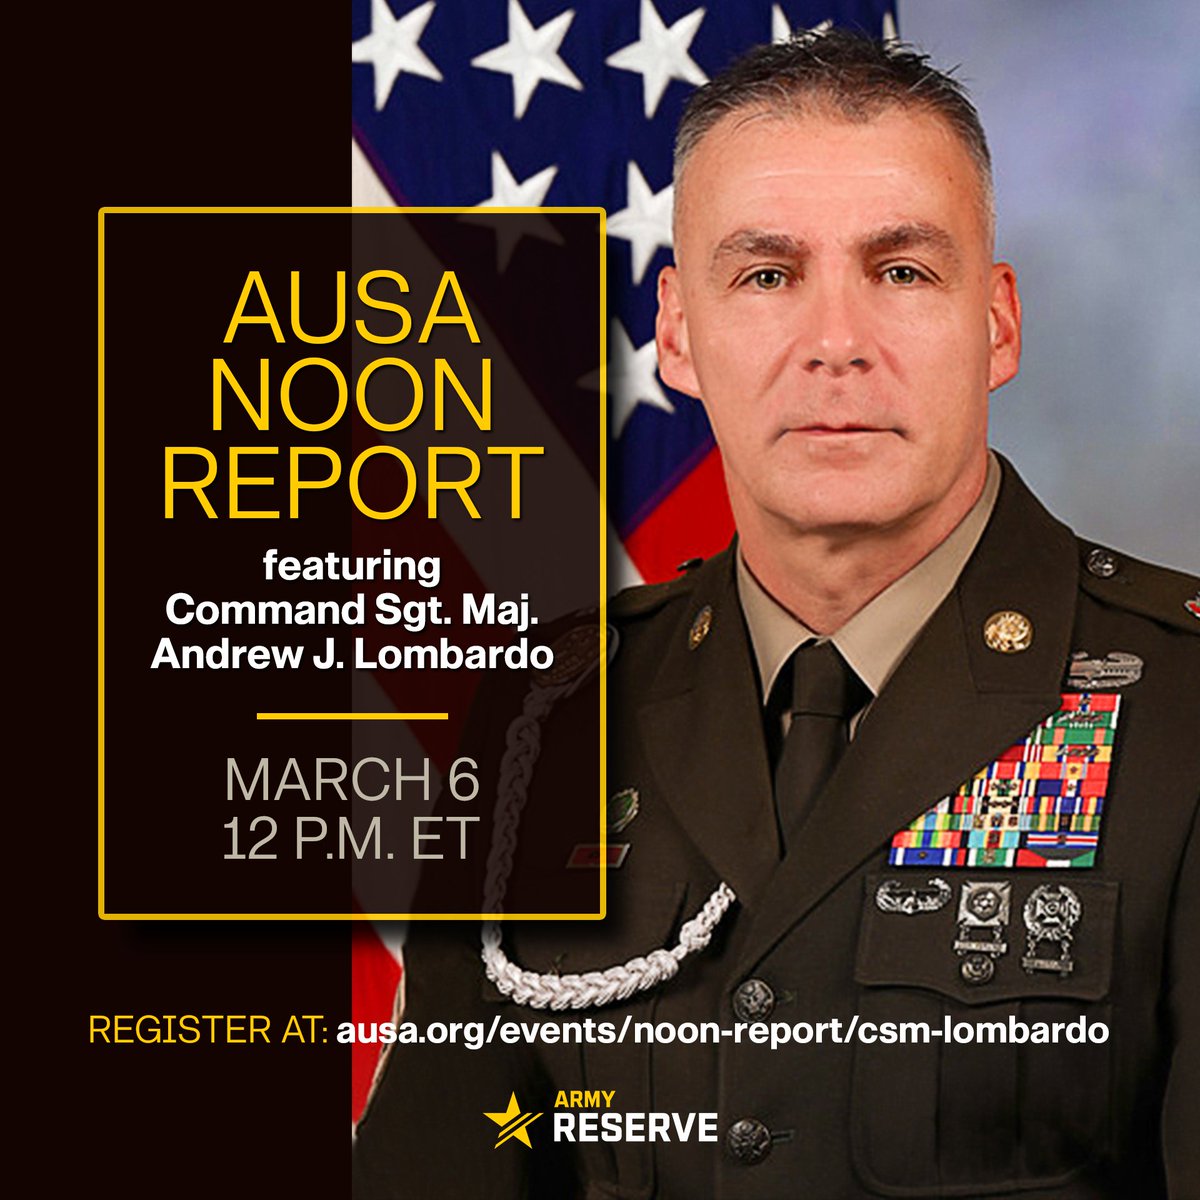 CSM Andrew Lombardo, command sergeant major of the Army Reserve, will be AUSA's Noon Report speaker on March 6th at 12 P.M. ET. Copy/paste the link into your browser to join the webinar: ausa.org/events/noon-re… .@ArmyReserveCSM @AUSAorg